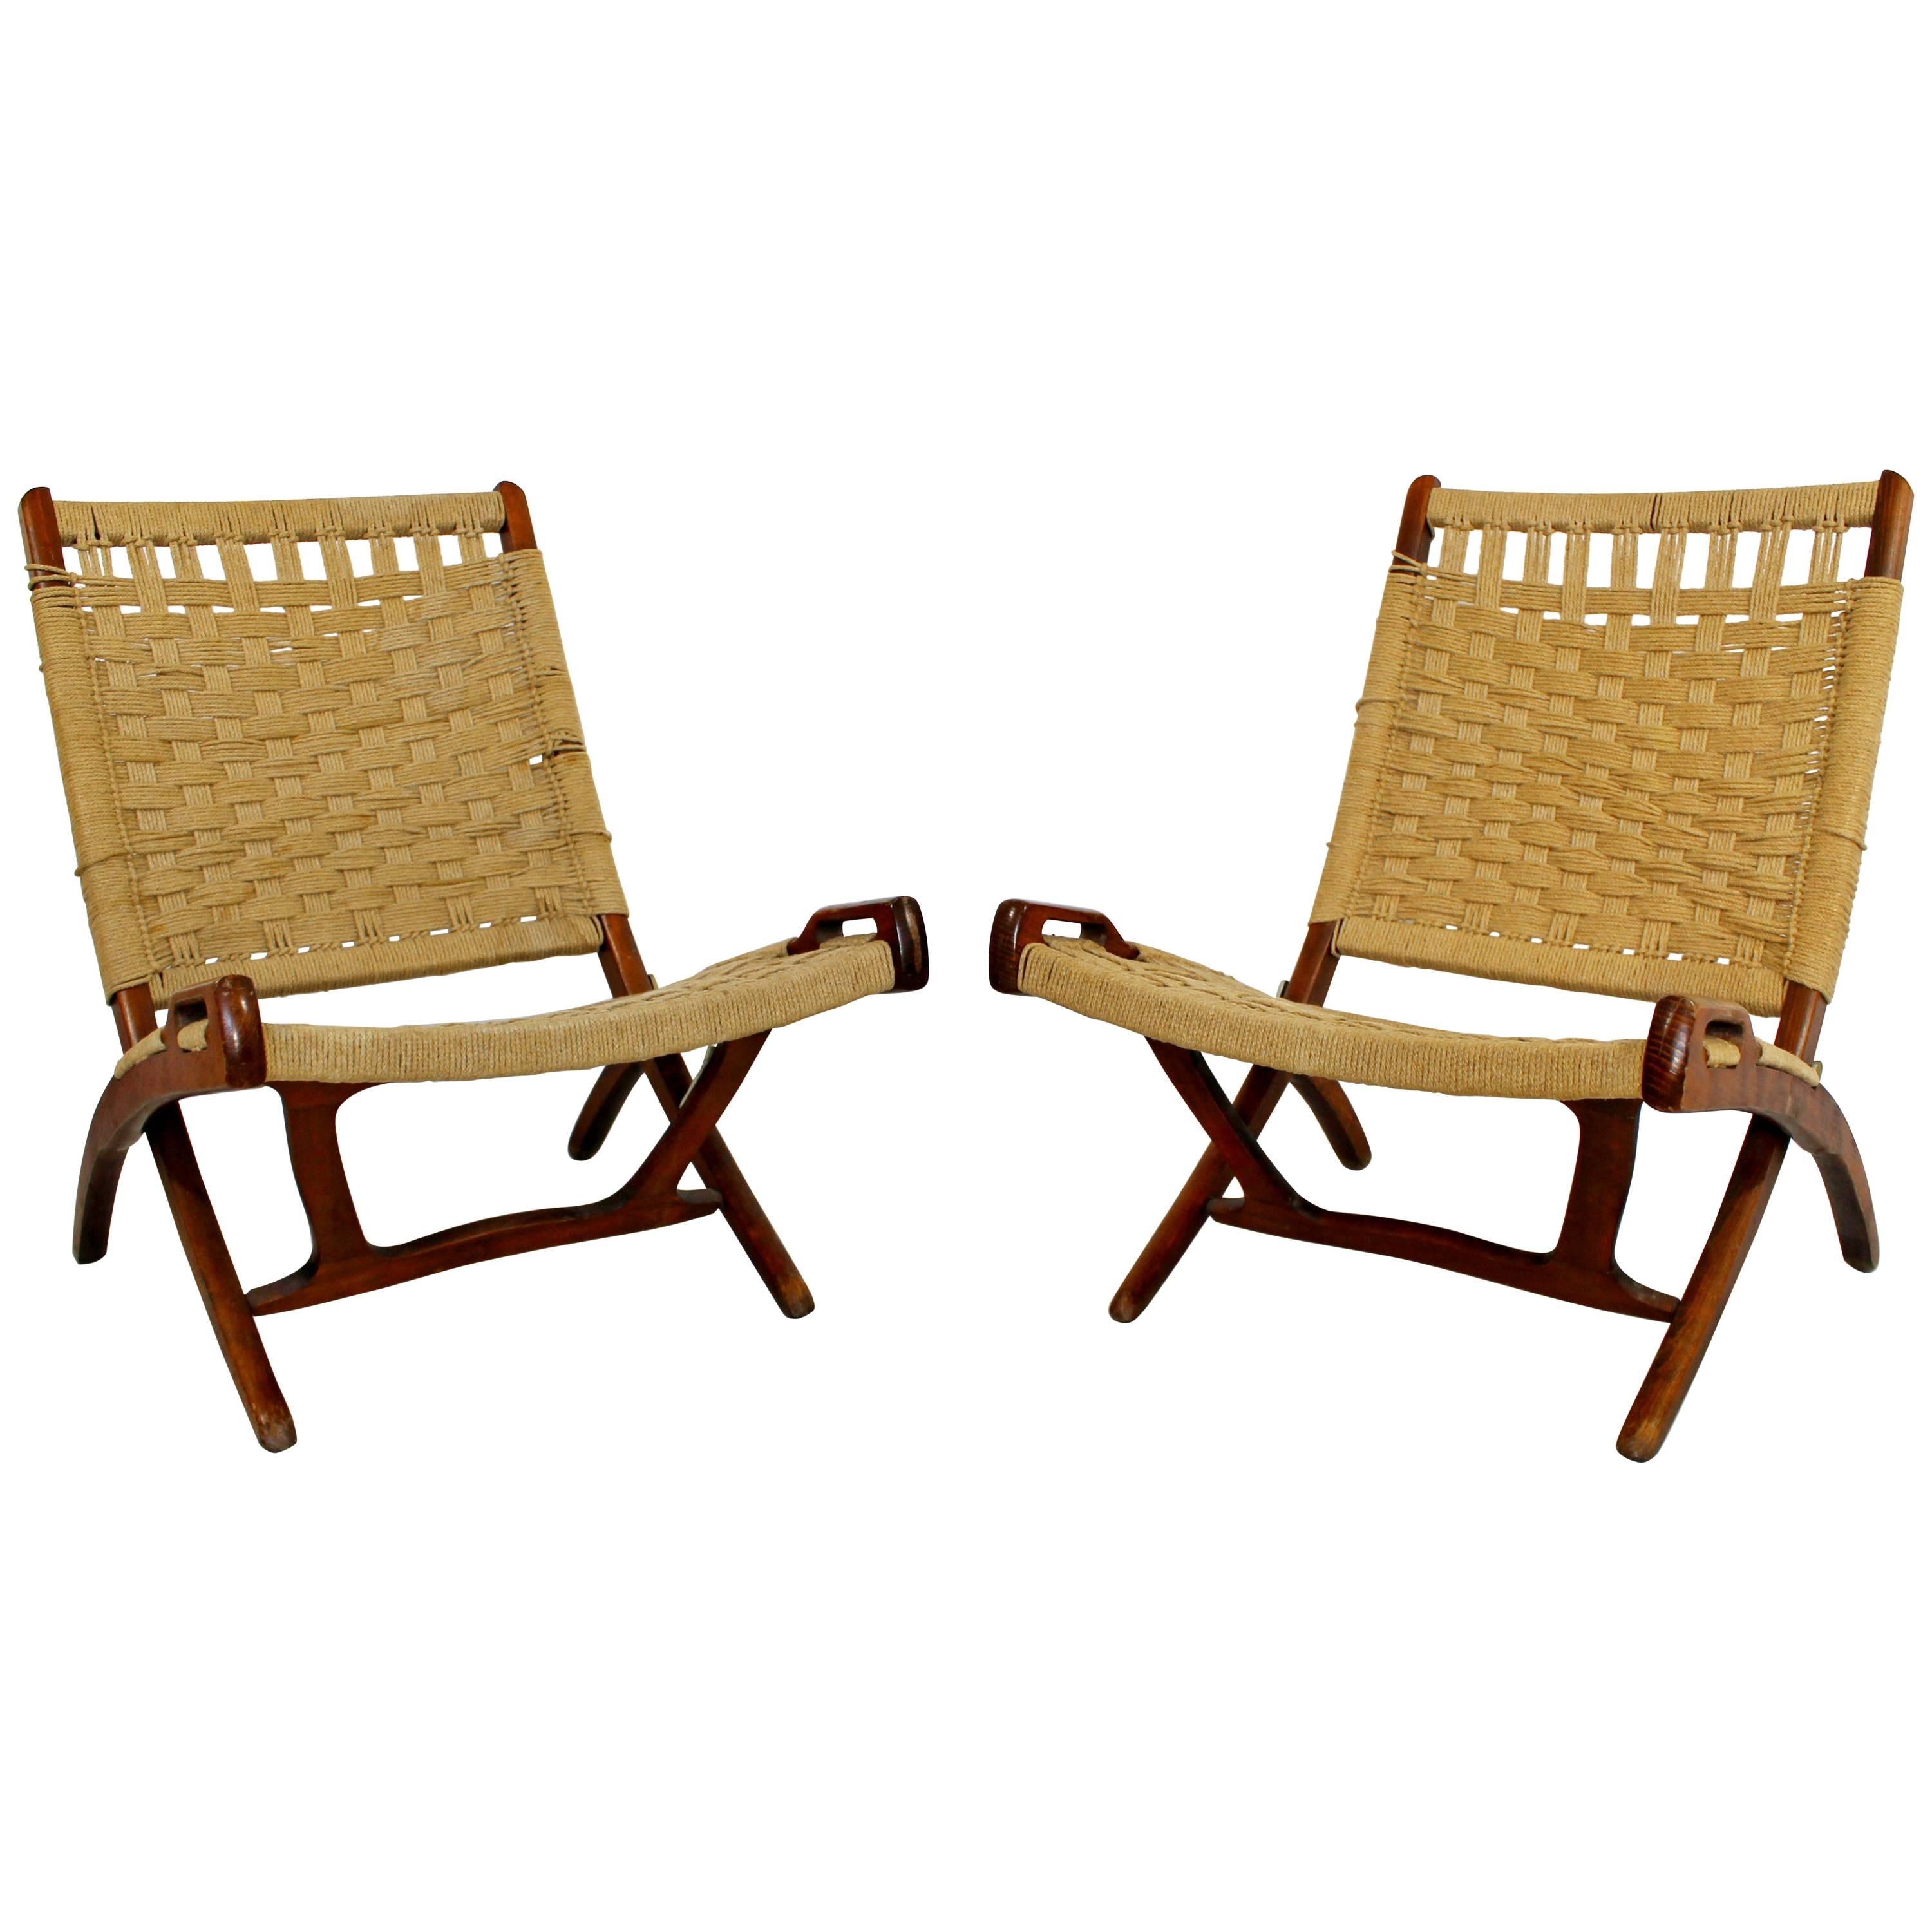 Mid-Century Modern Pair of Rope Cord and Wood Folding Chairs Hans Wegner Style